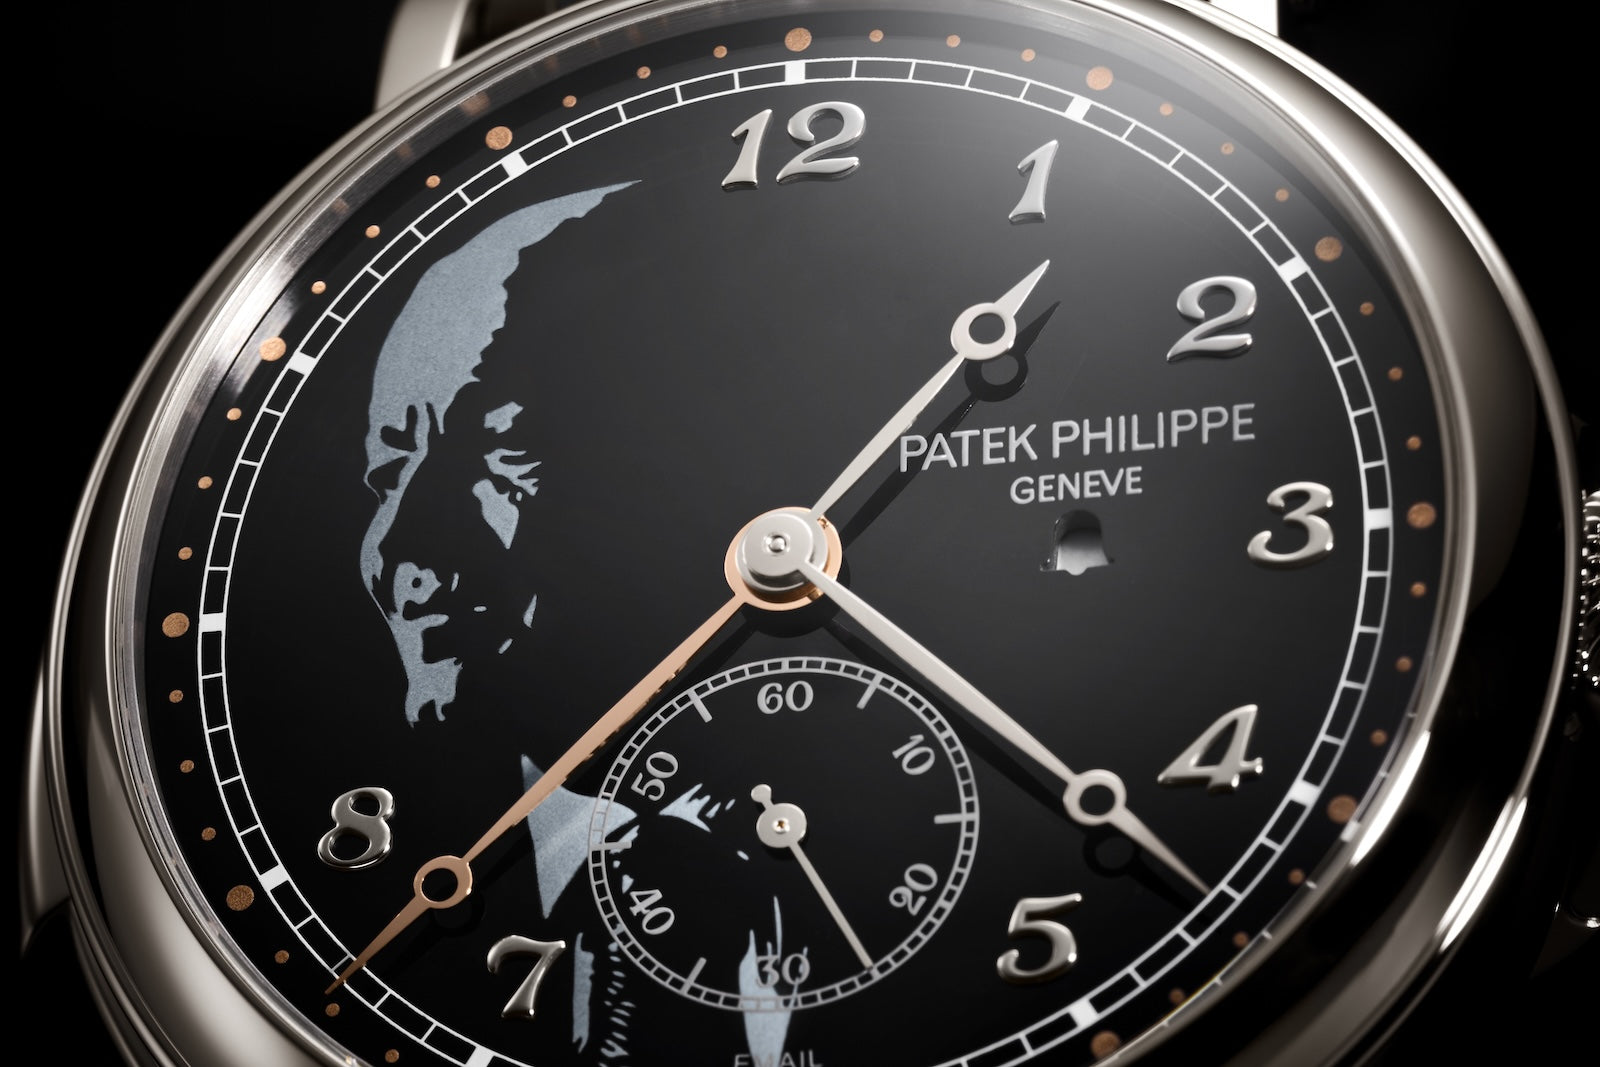 Patek Philippe Minute Repeater Alarm 1938P: A tribute to Philippe Stern